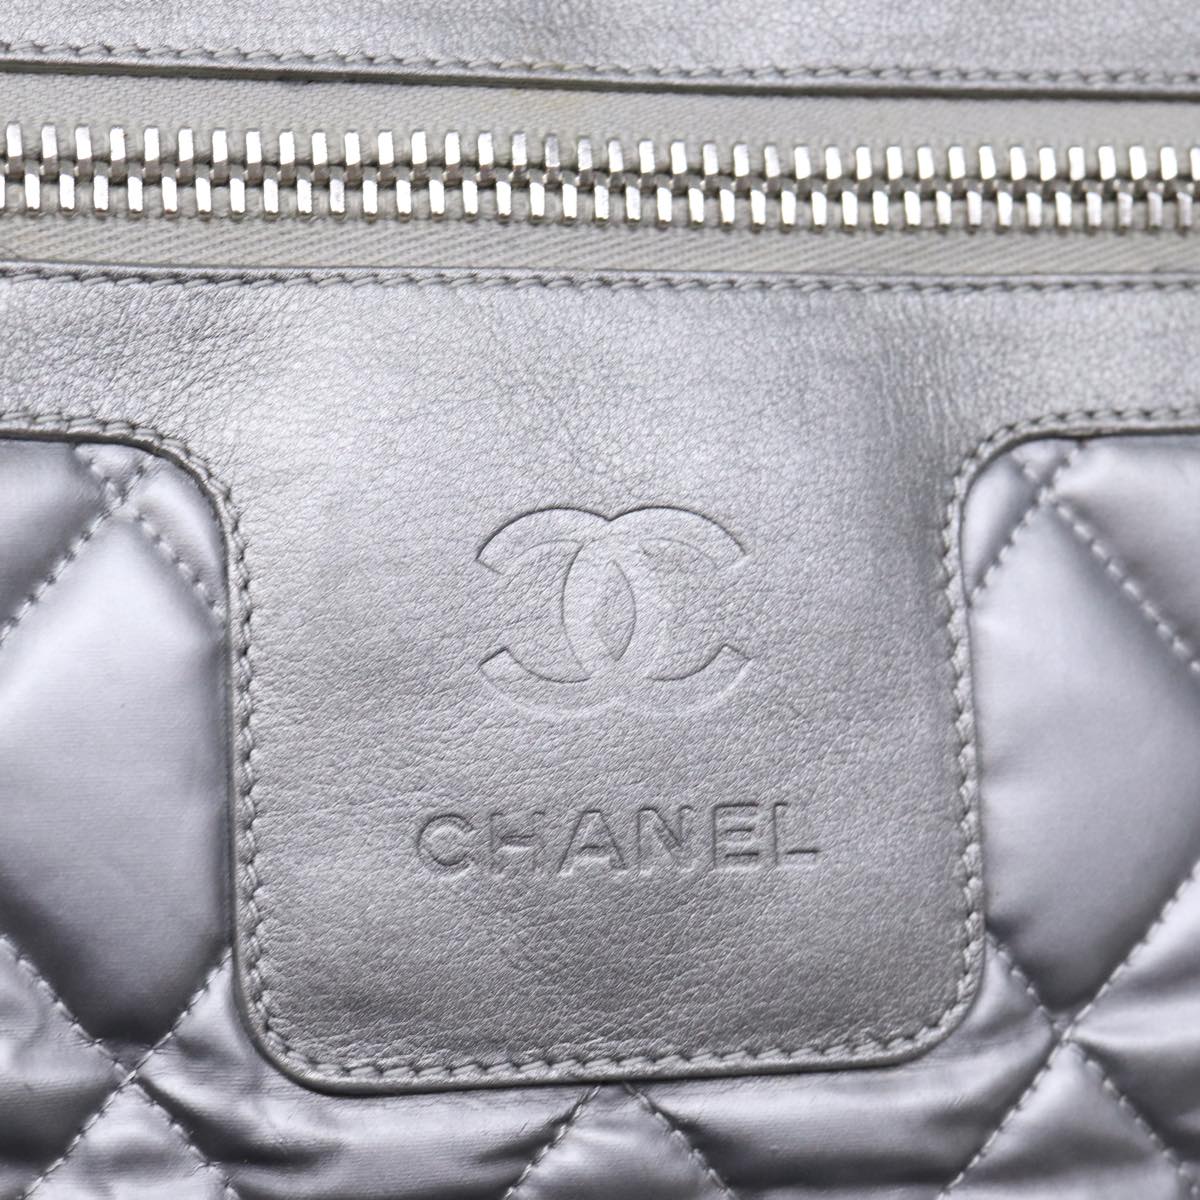 CHANEL Cococoon Hand Bag Patent leather Silver CC Auth bs13736